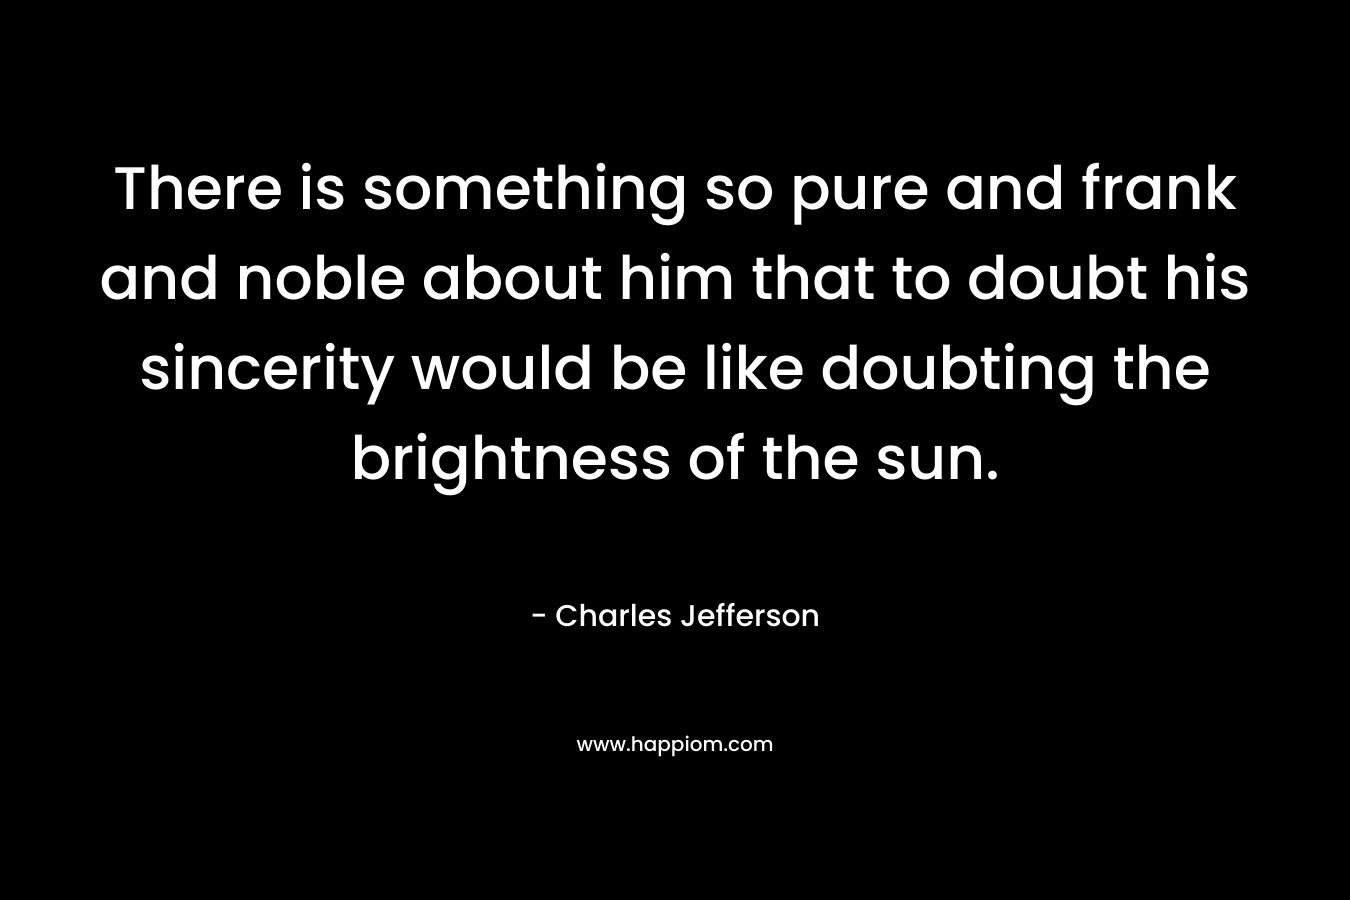 There is something so pure and frank and noble about him that to doubt his sincerity would be like doubting the brightness of the sun. – Charles Jefferson